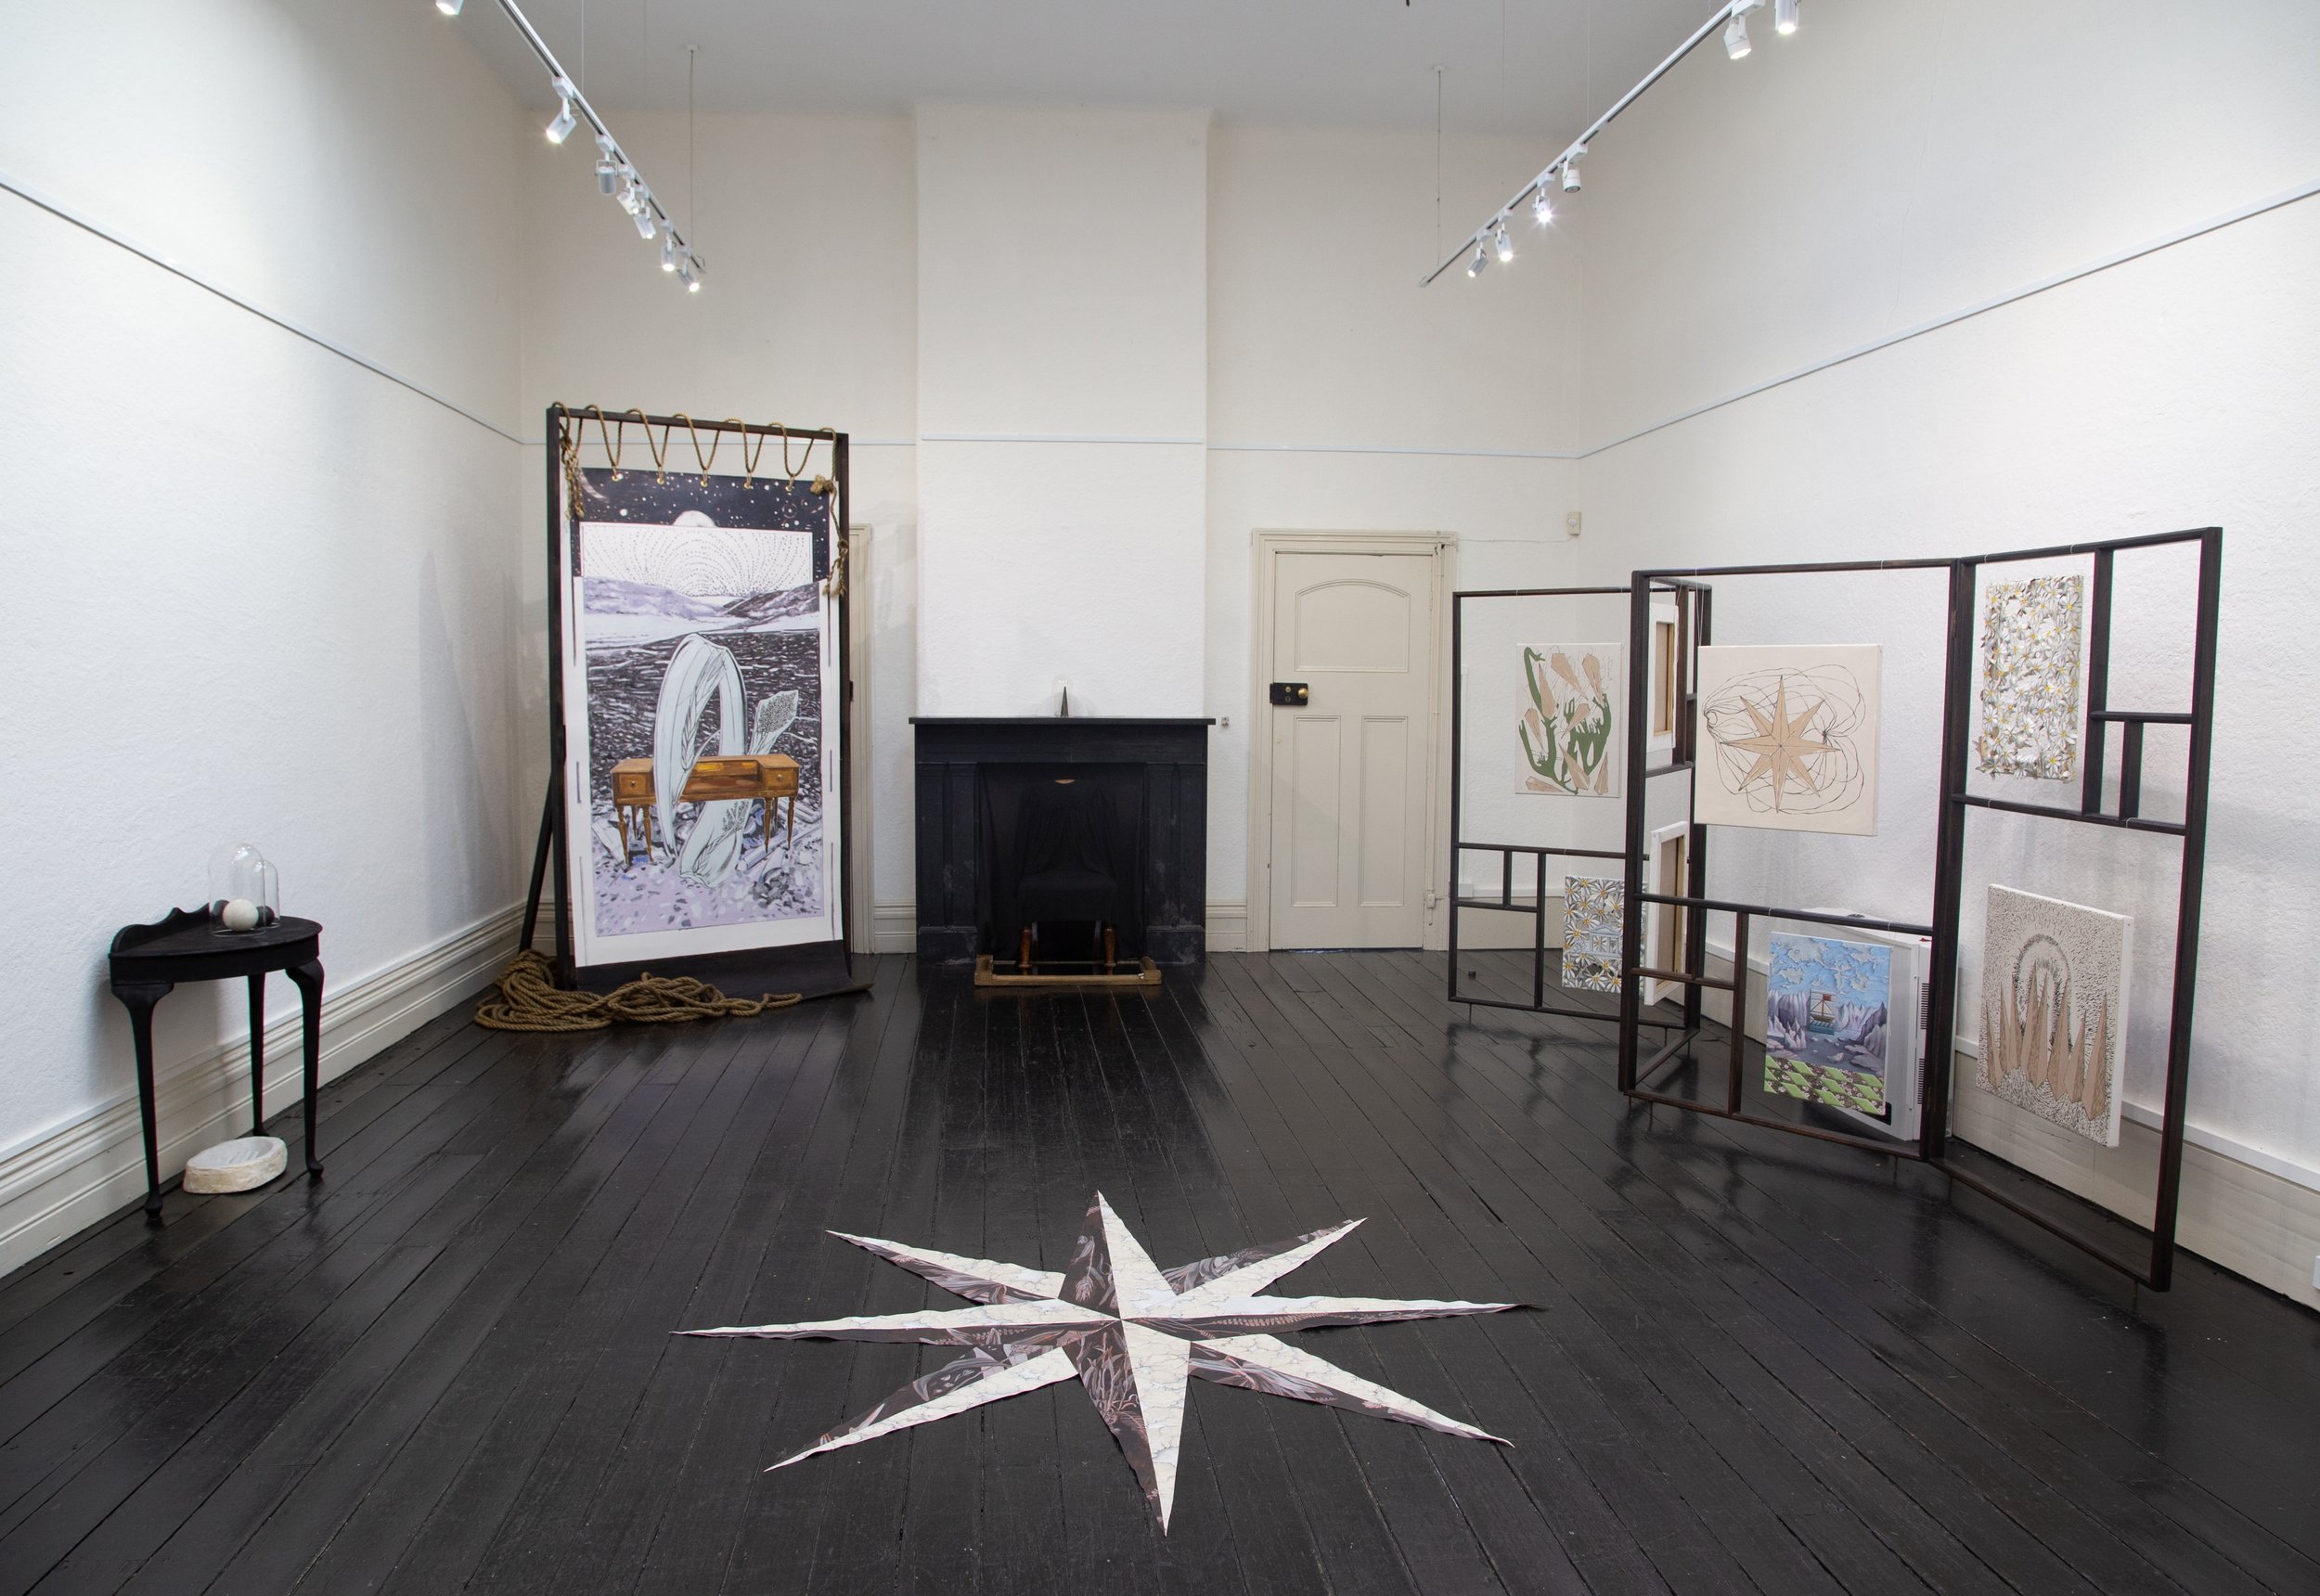  Installation image, with  All difficulties, All knowledge and all mysteries, Lodestar, and screen with small paintings by Jo Chew and Amber Koroluk-Stephenson  